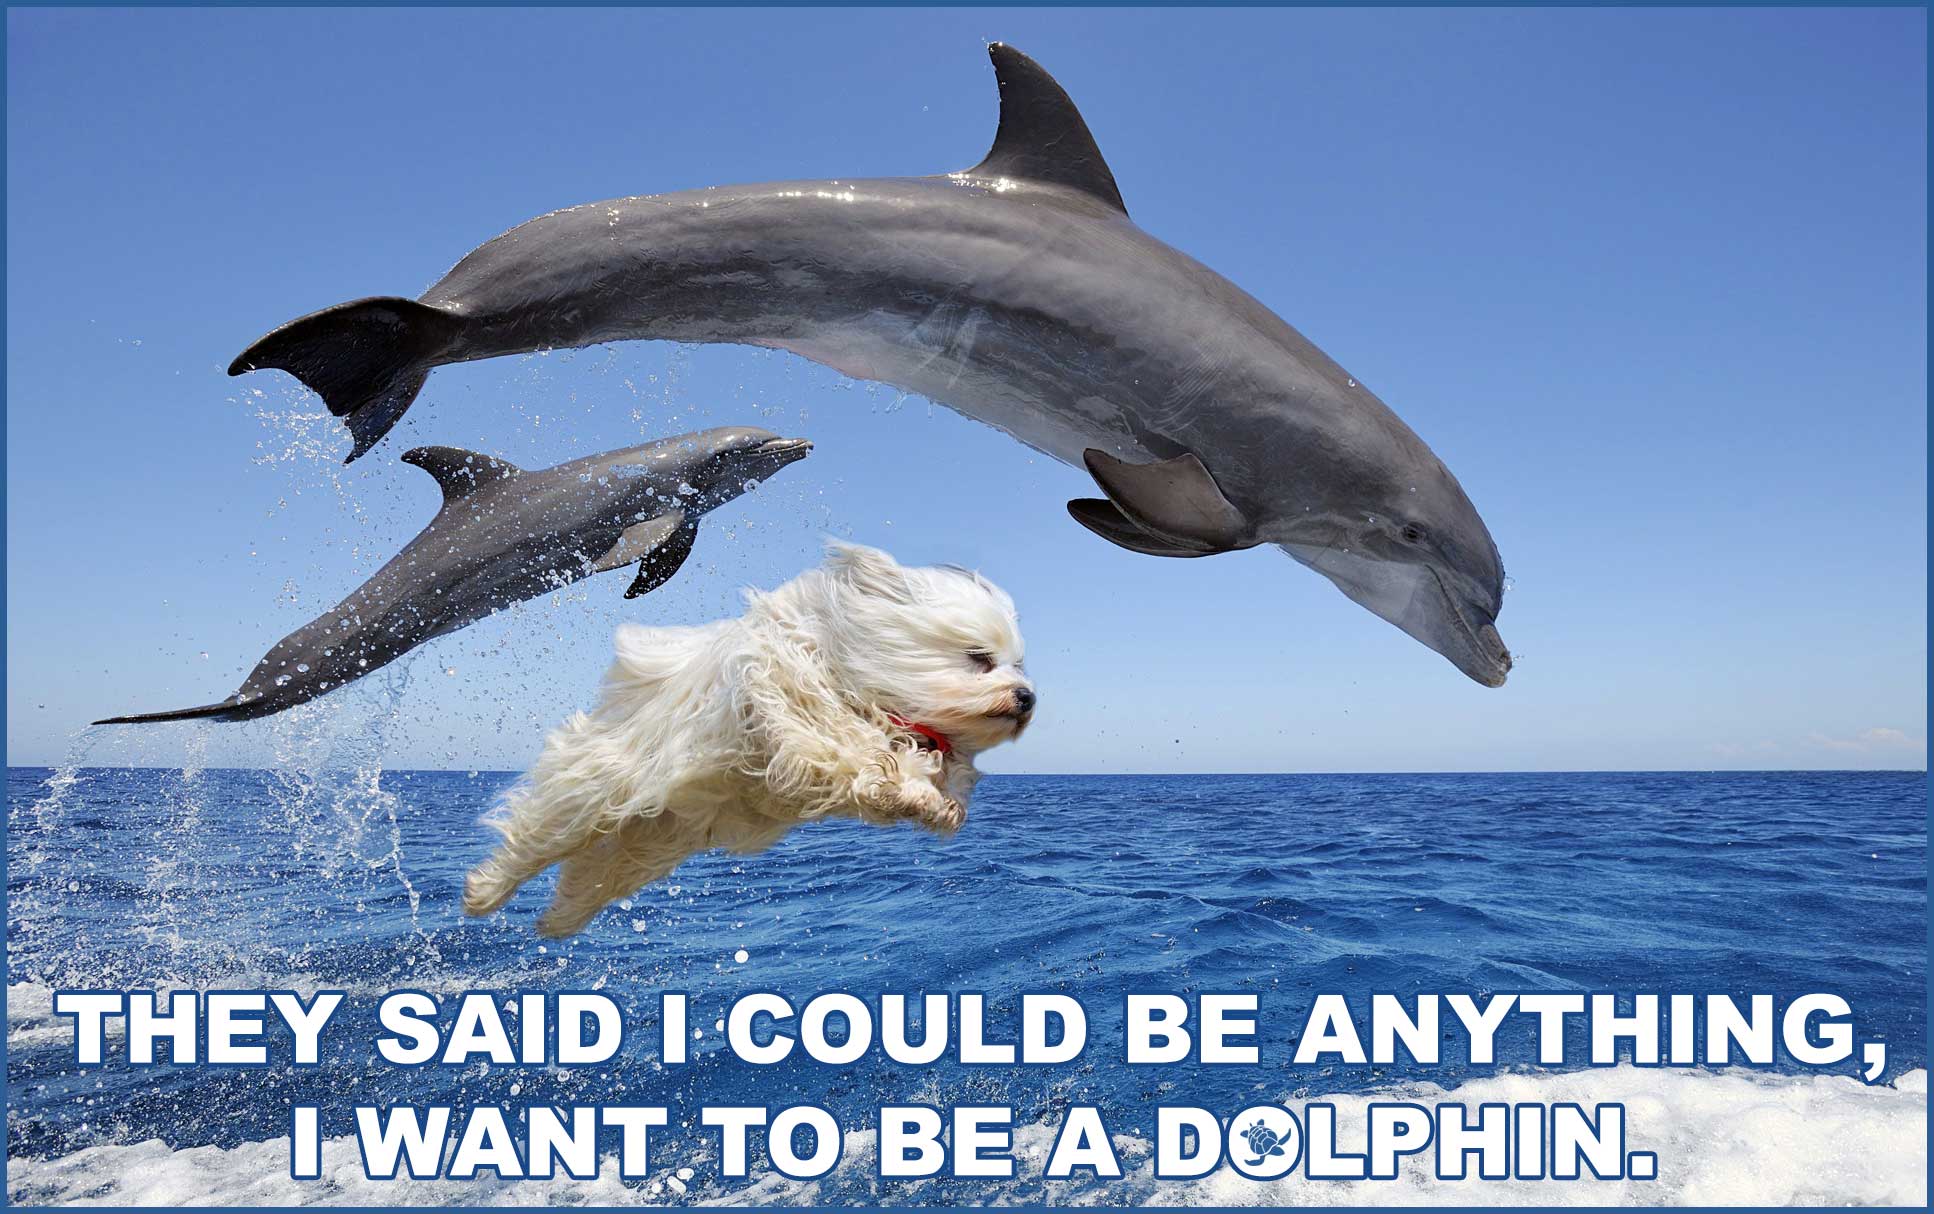 I want to be a dolphin